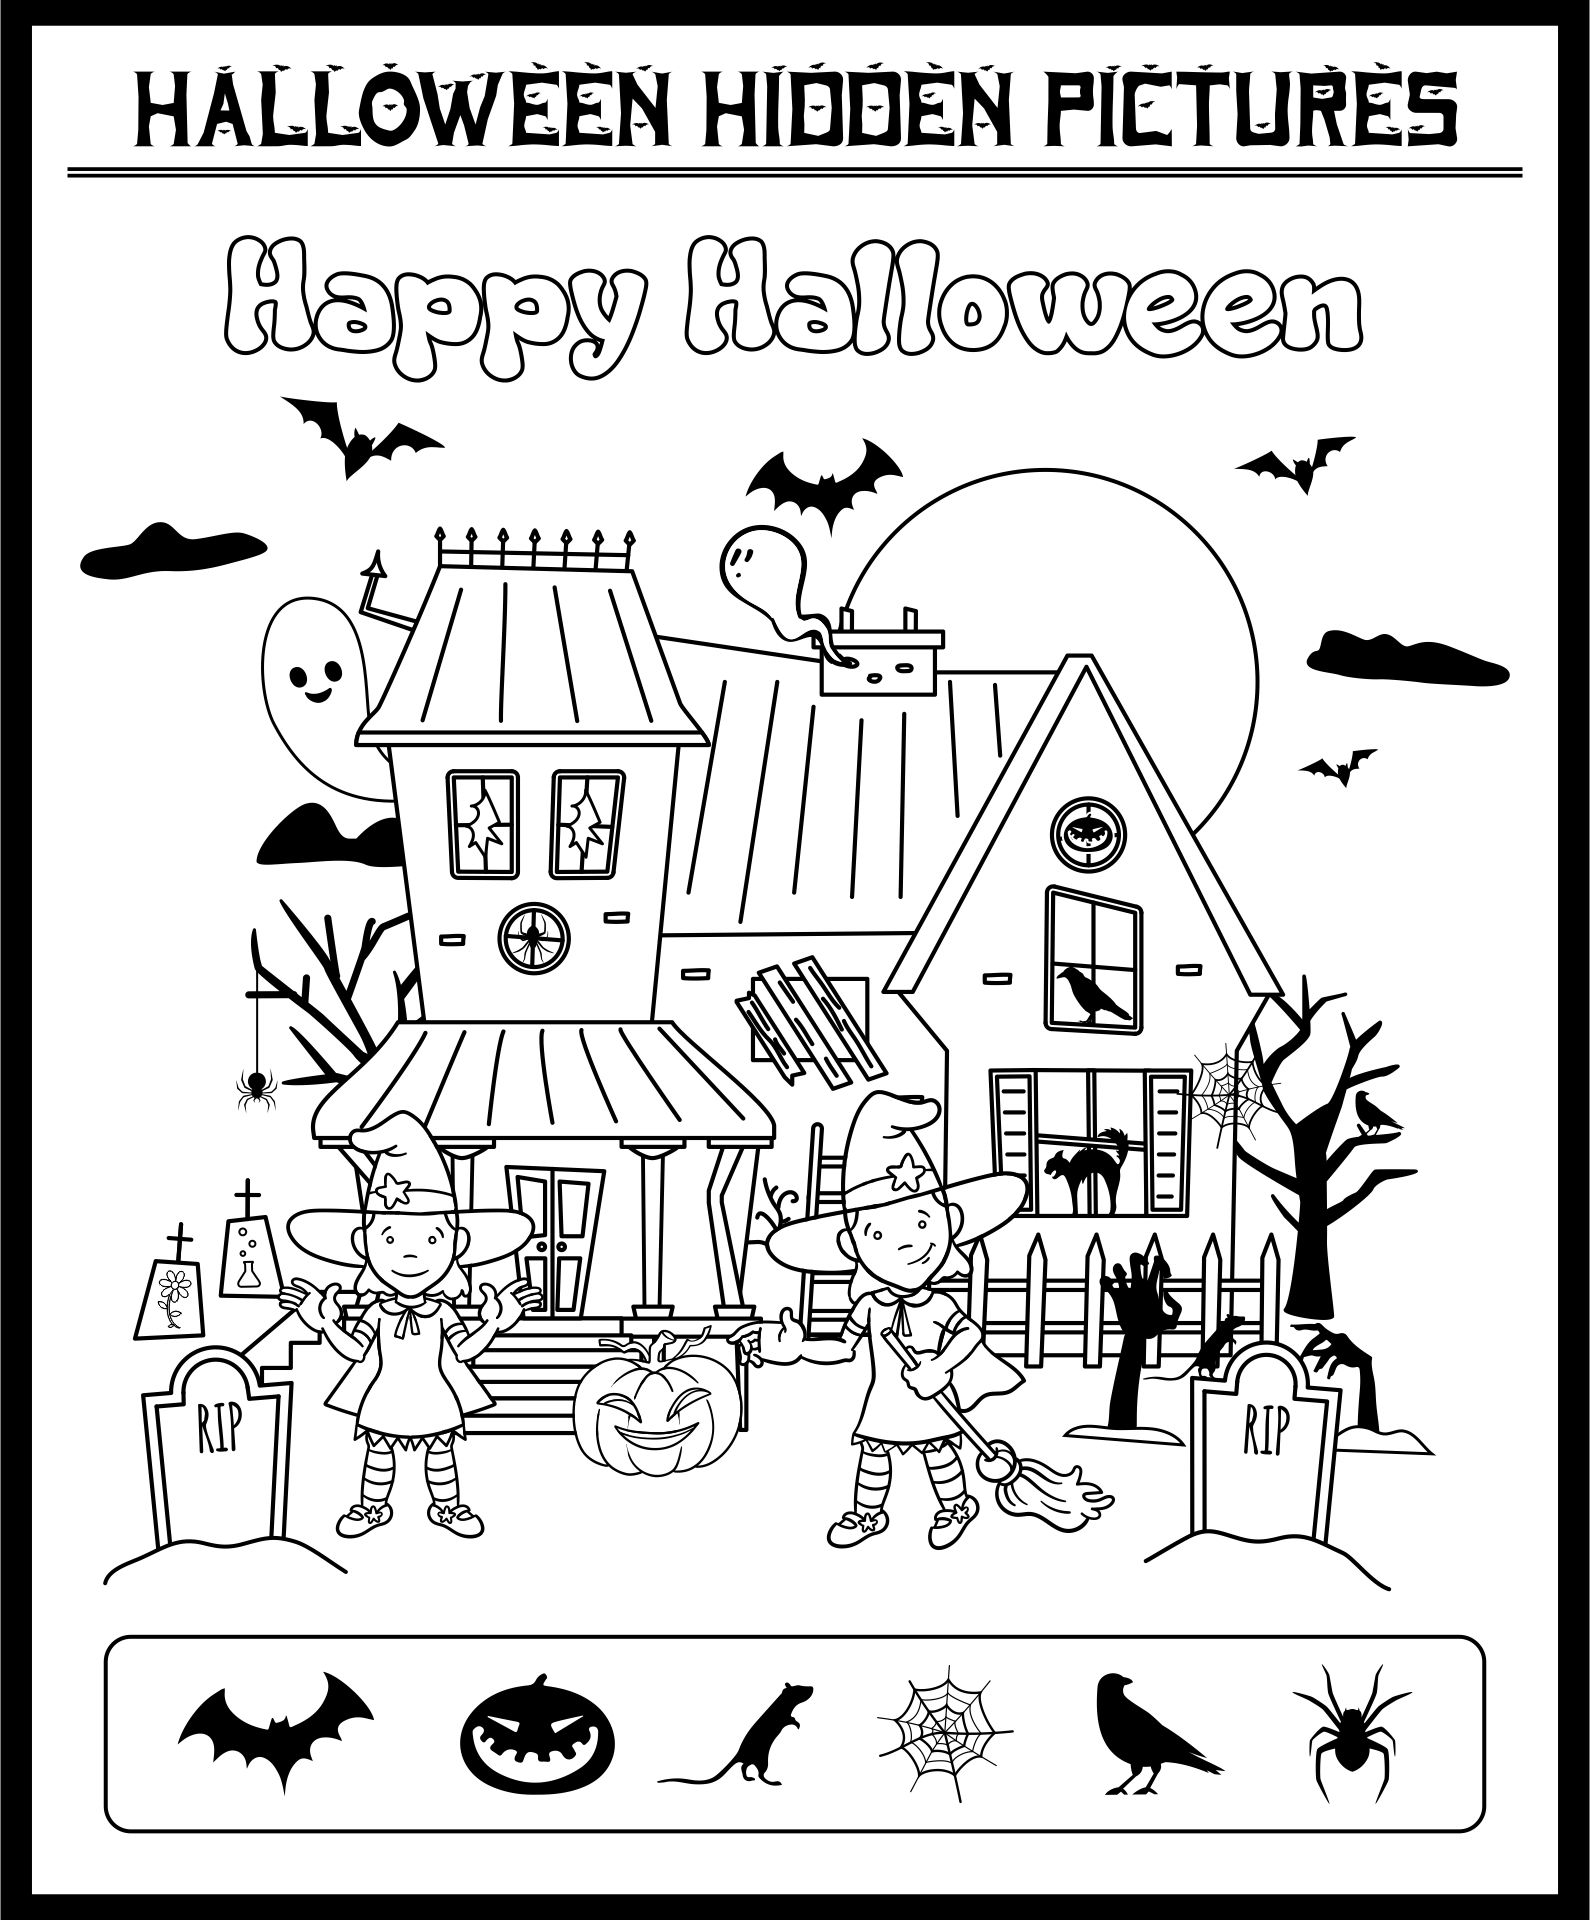 15-best-free-printable-halloween-hidden-picture-activities-pdf-for-free-at-printablee